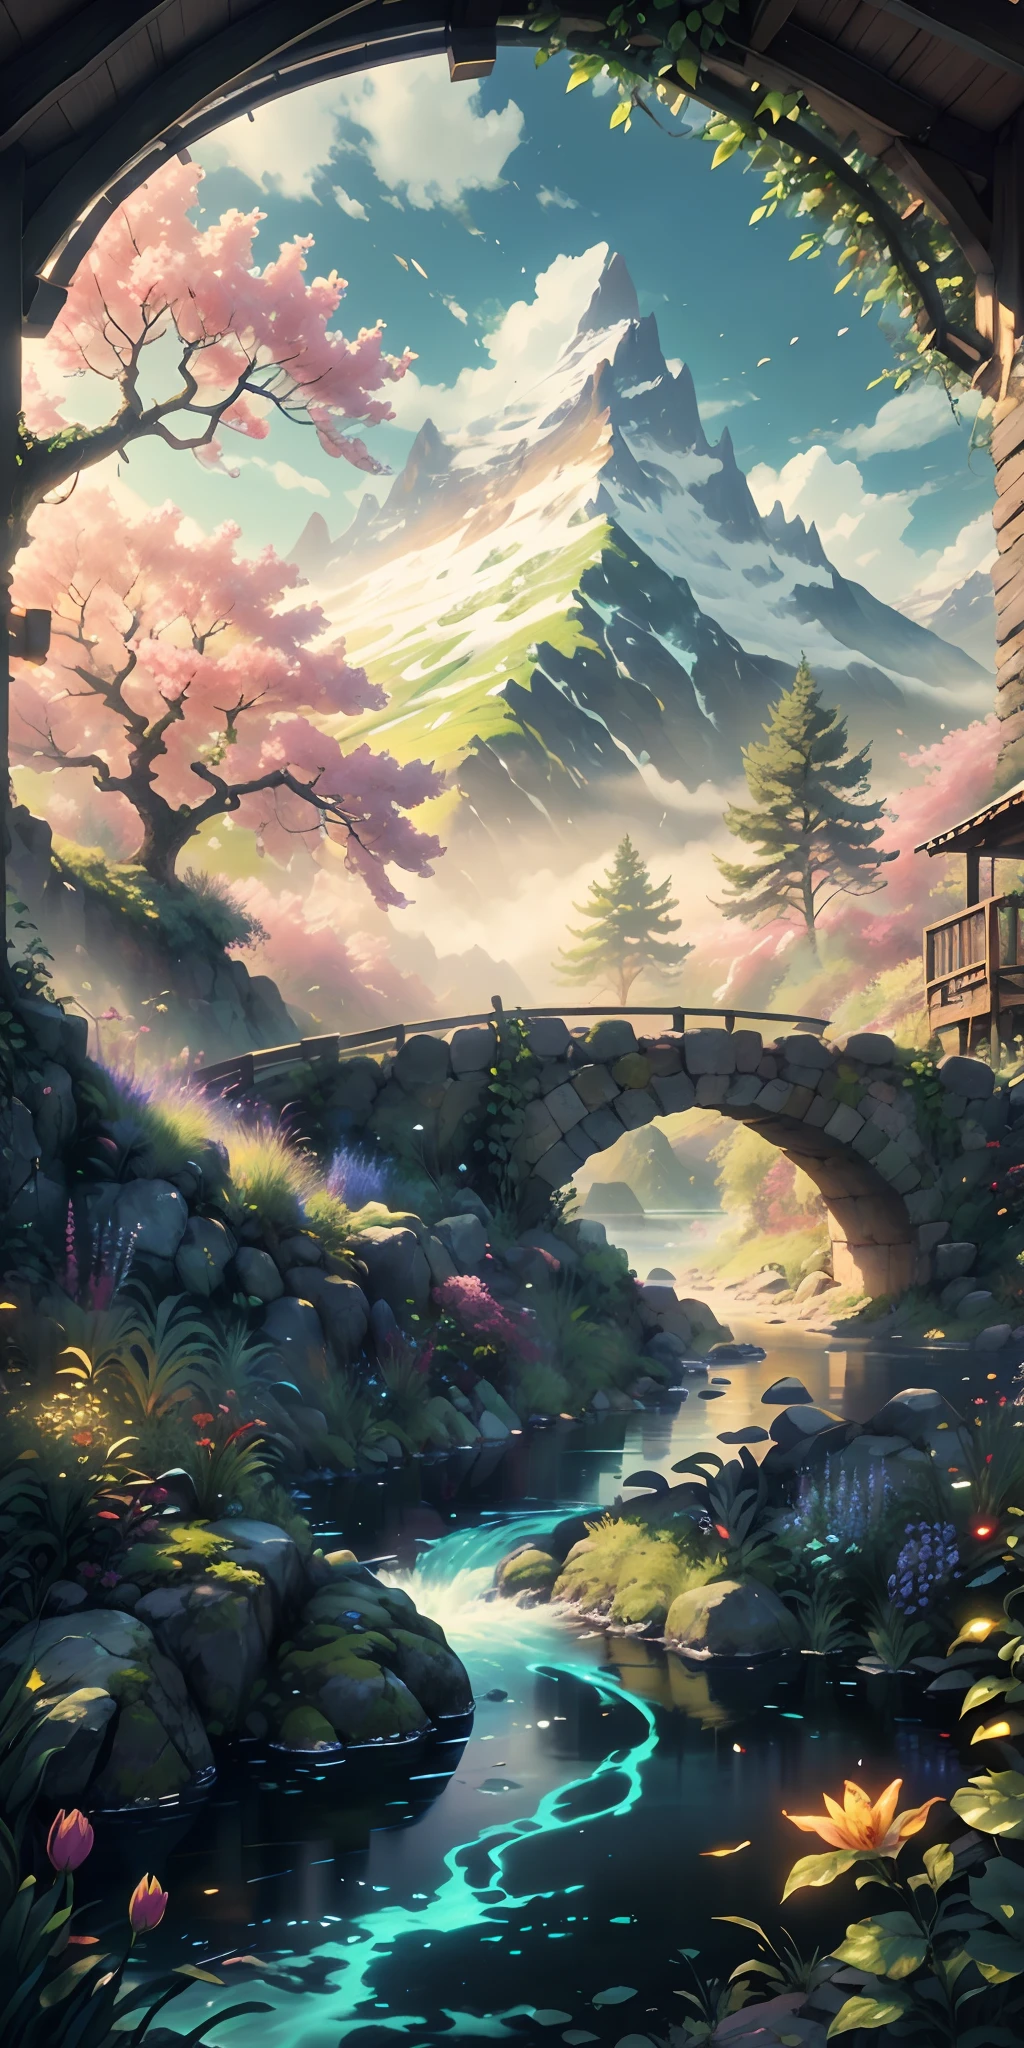 the exquisite beauty of nature:1.1, realistic, professional, vivid colors, soft lighting, landscapes, detailed trees, colorful flowers, flowing river, majestic mountains, gentle breeze, clear blue sky, sunlight filtering through the leaves, vibrant hues, natural serenity, lush greenery, realistic textures